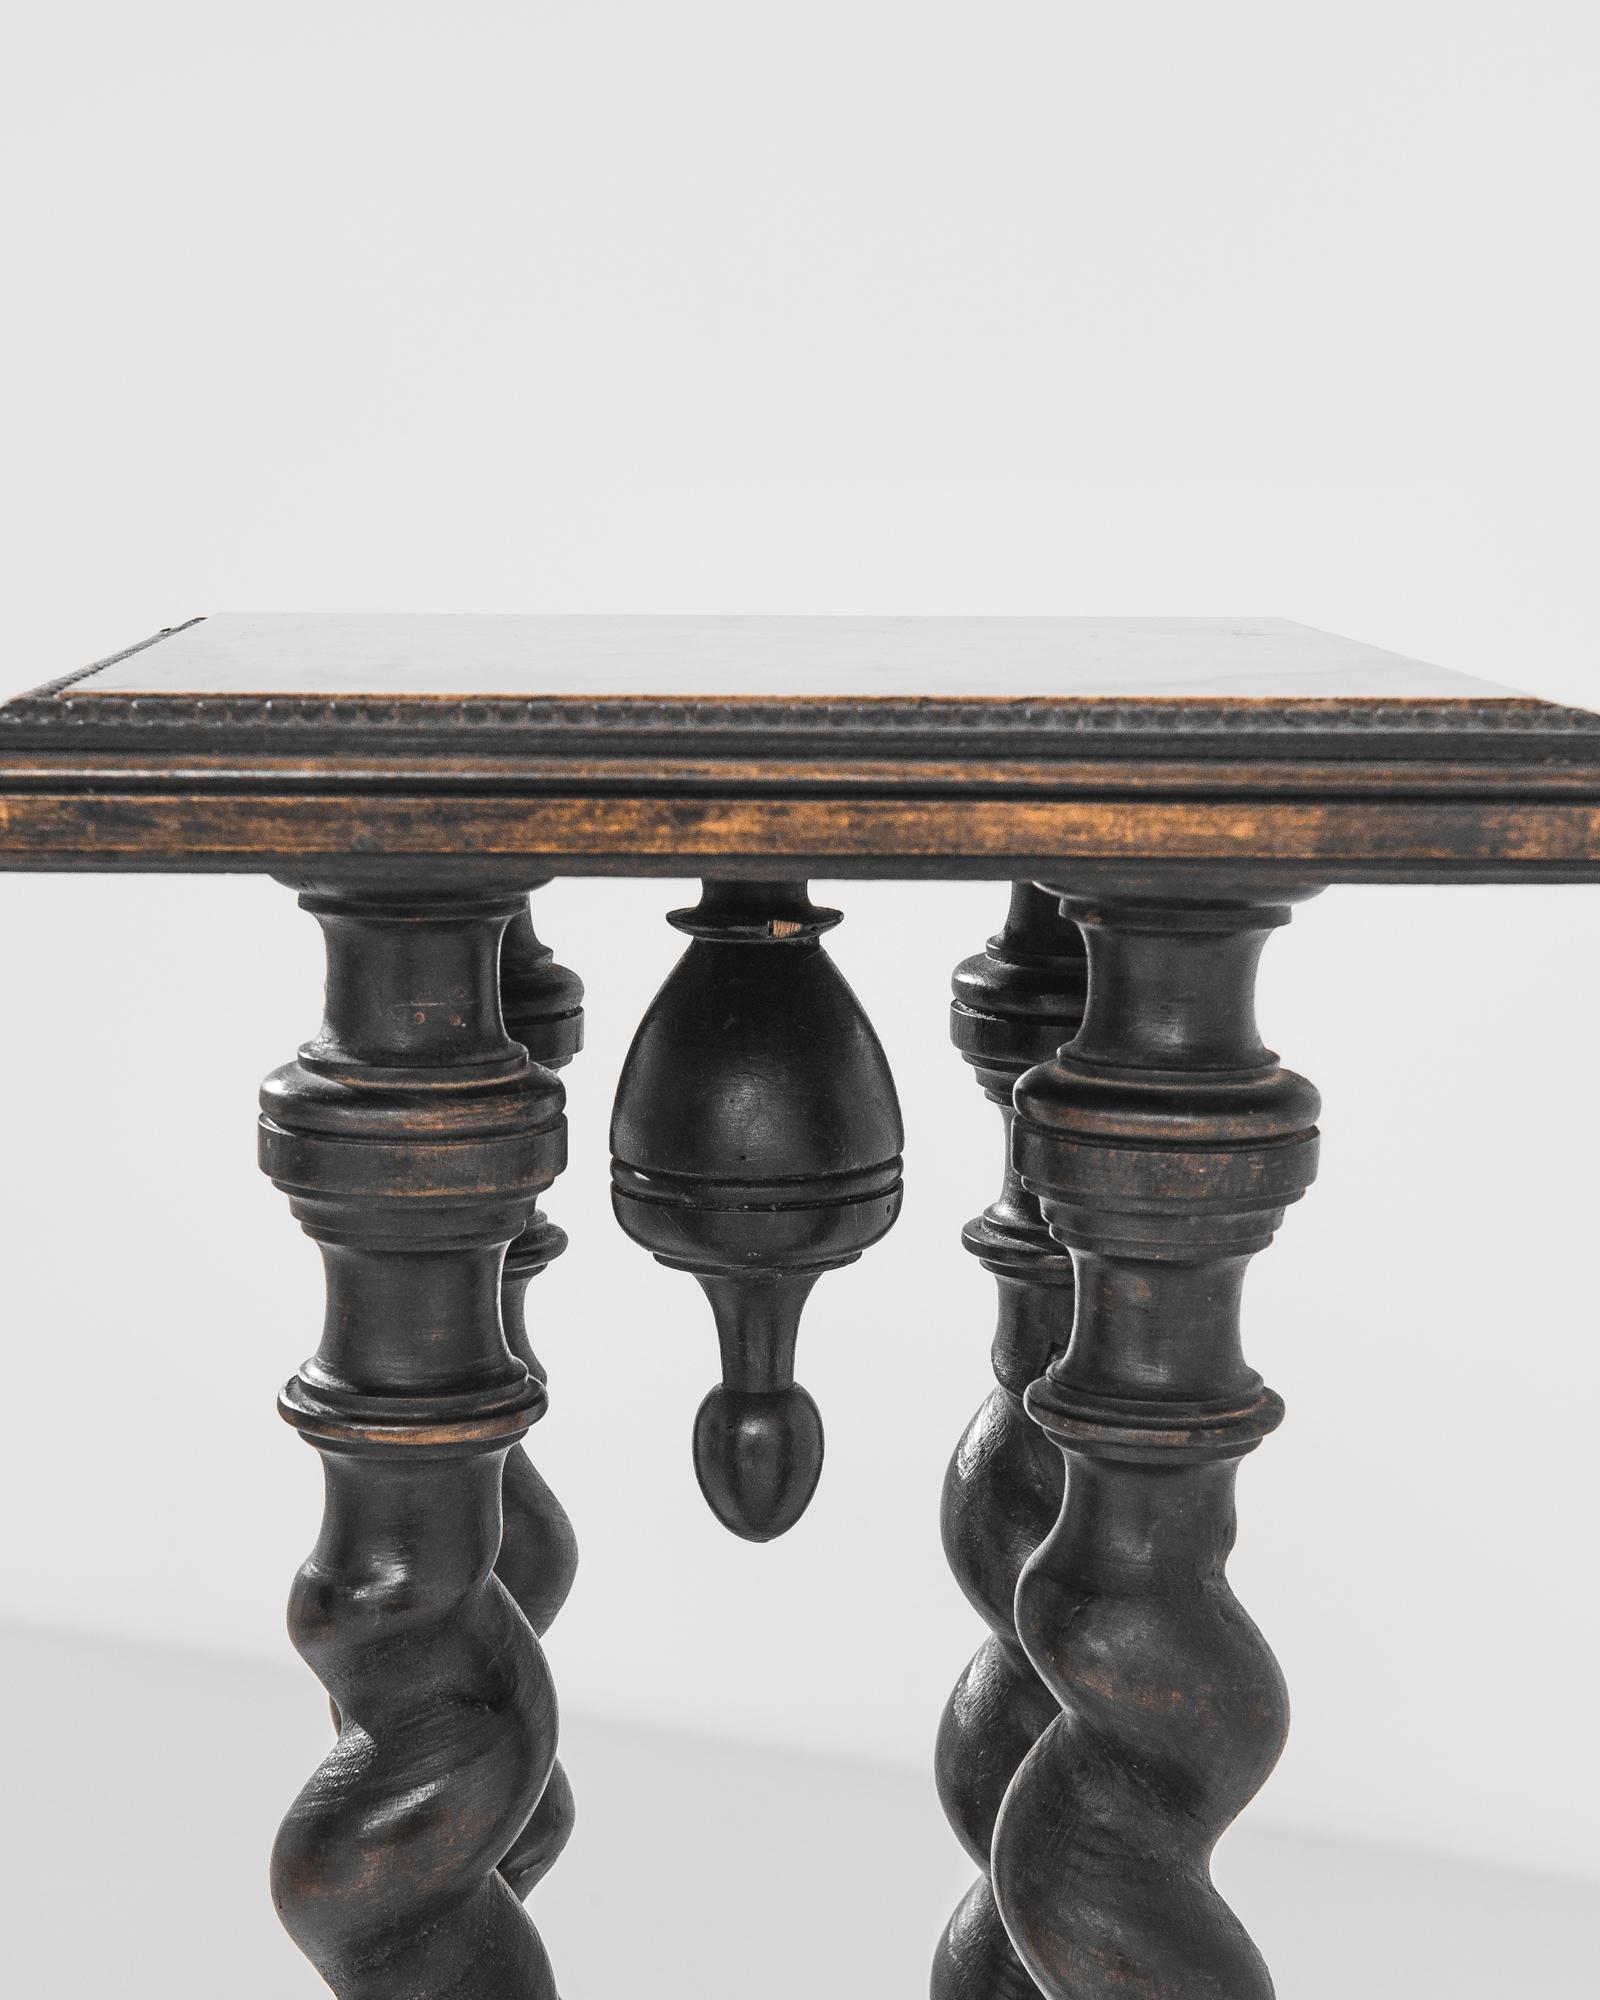 Dignified and ornate, this wooden pedestal from turn of the century France provides an eye-catching centerpiece. Four barley twist columns support a square platform, crowned with a marble tabletop. The pale coral color of the marble, veined with